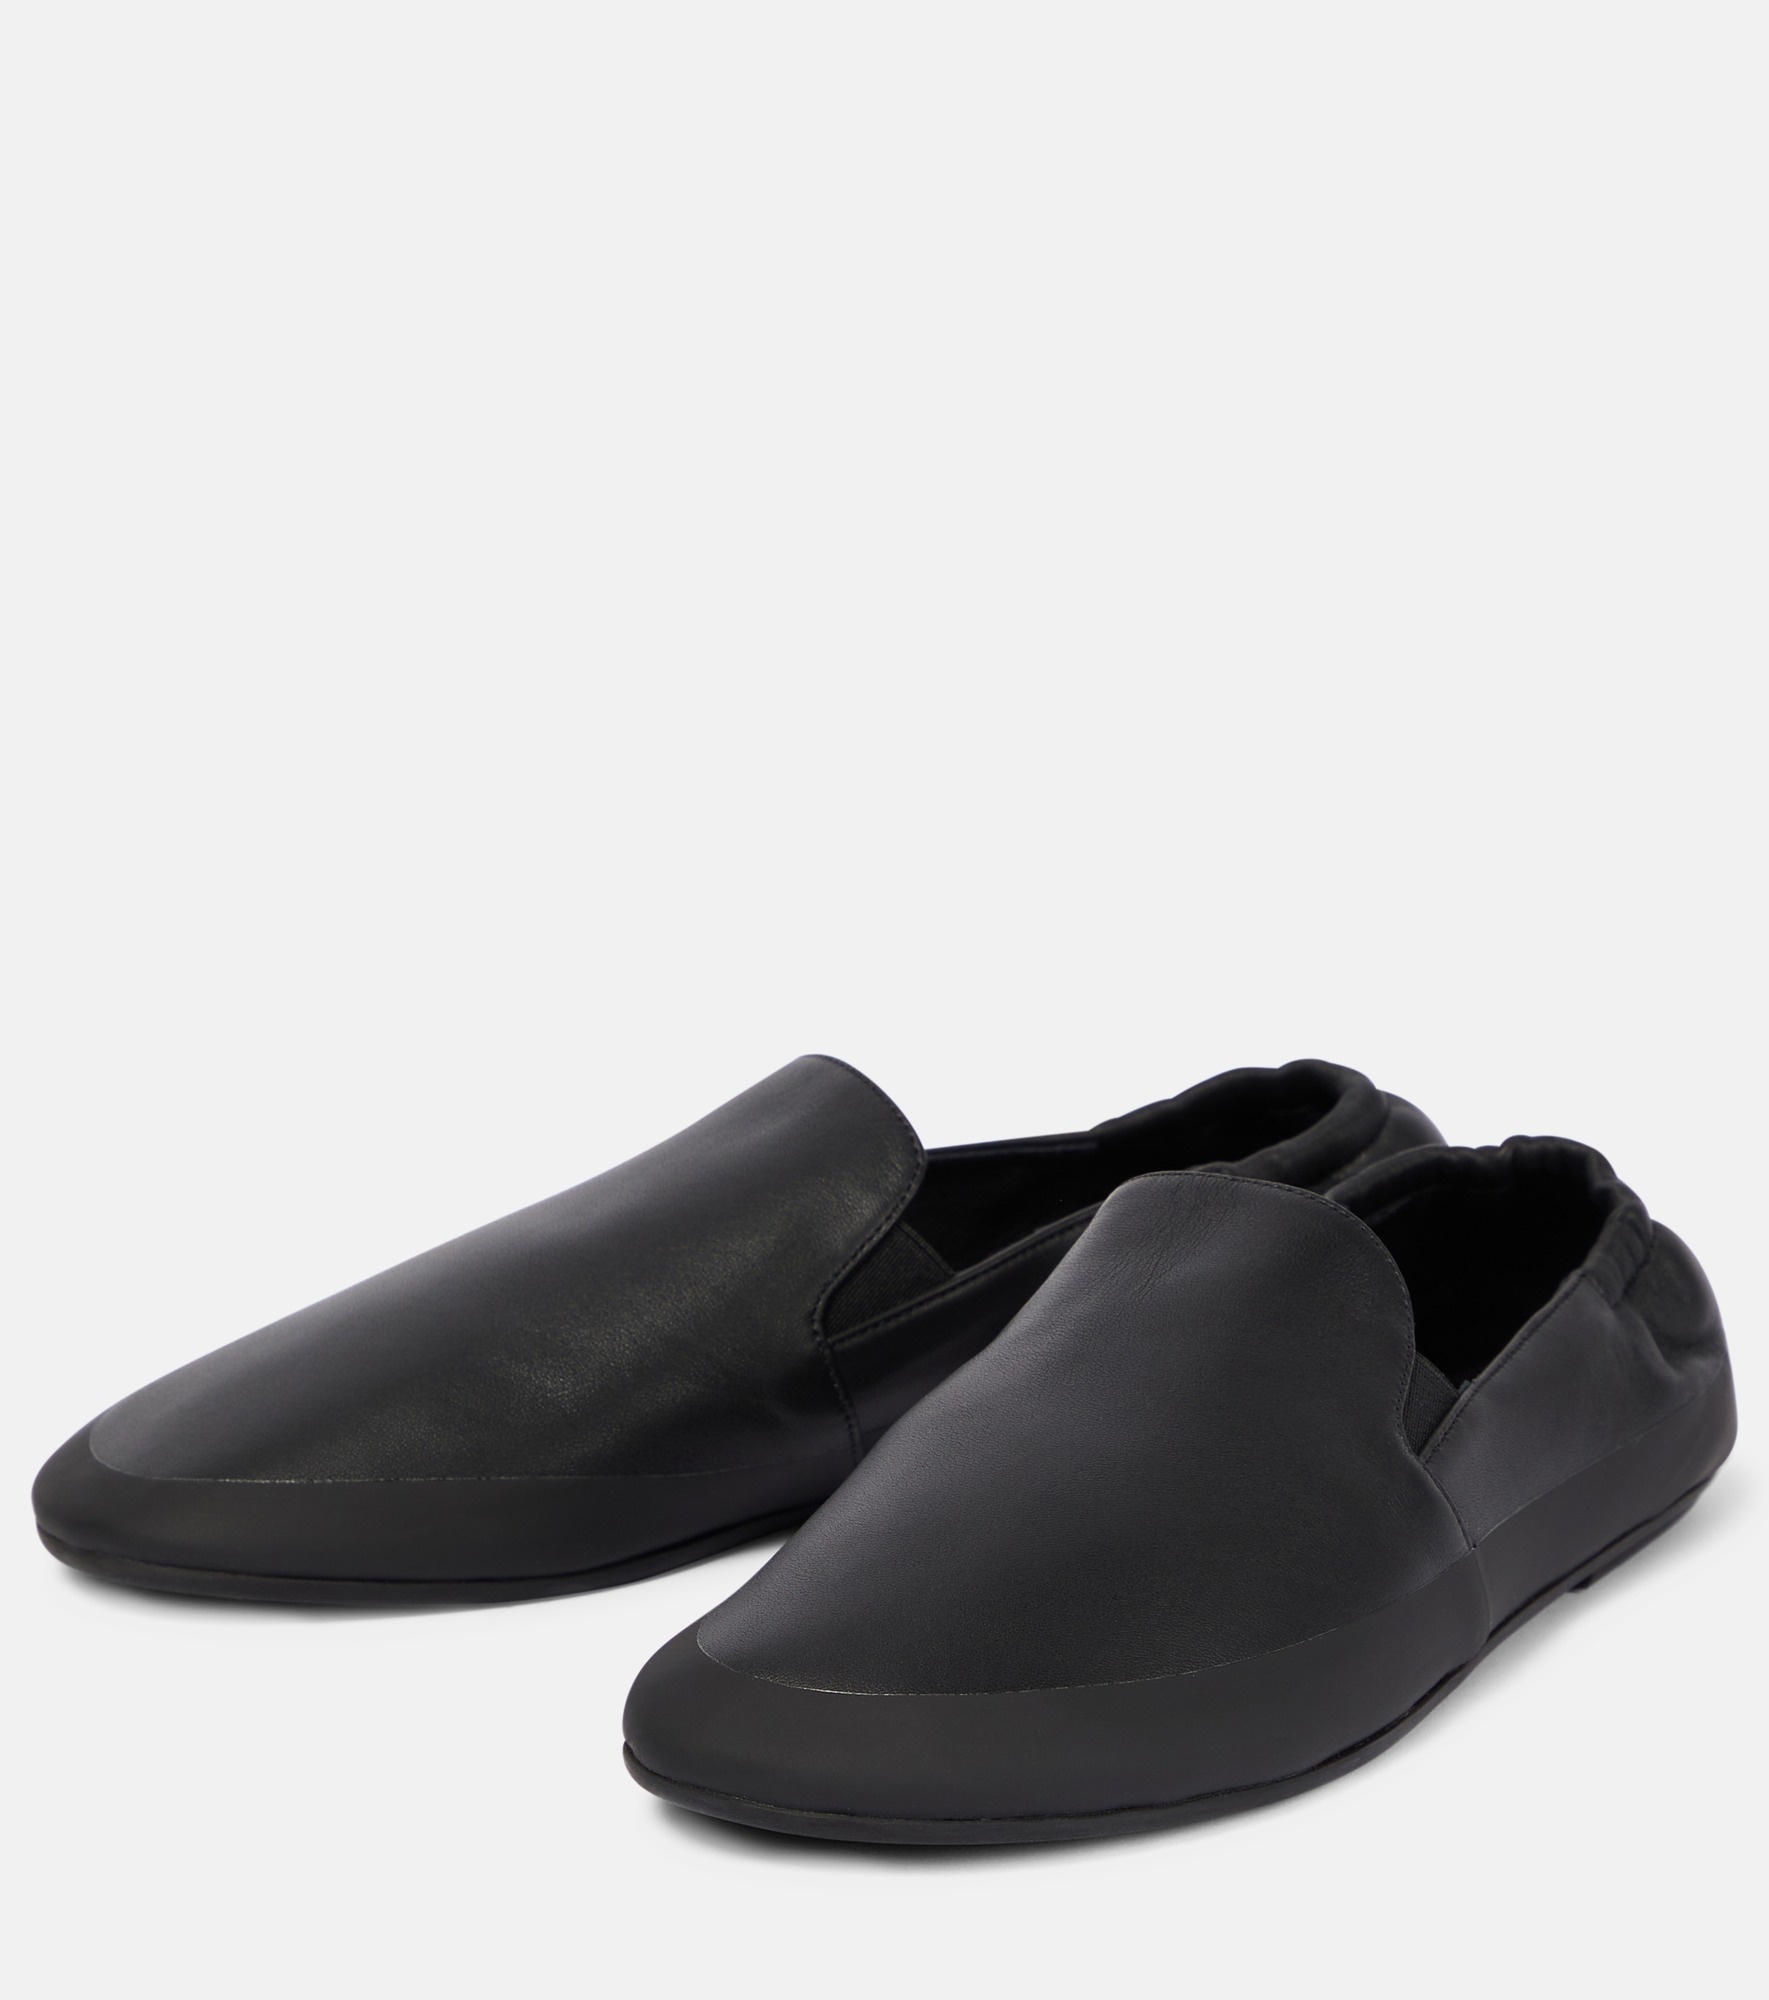 Tech leather loafers - 5